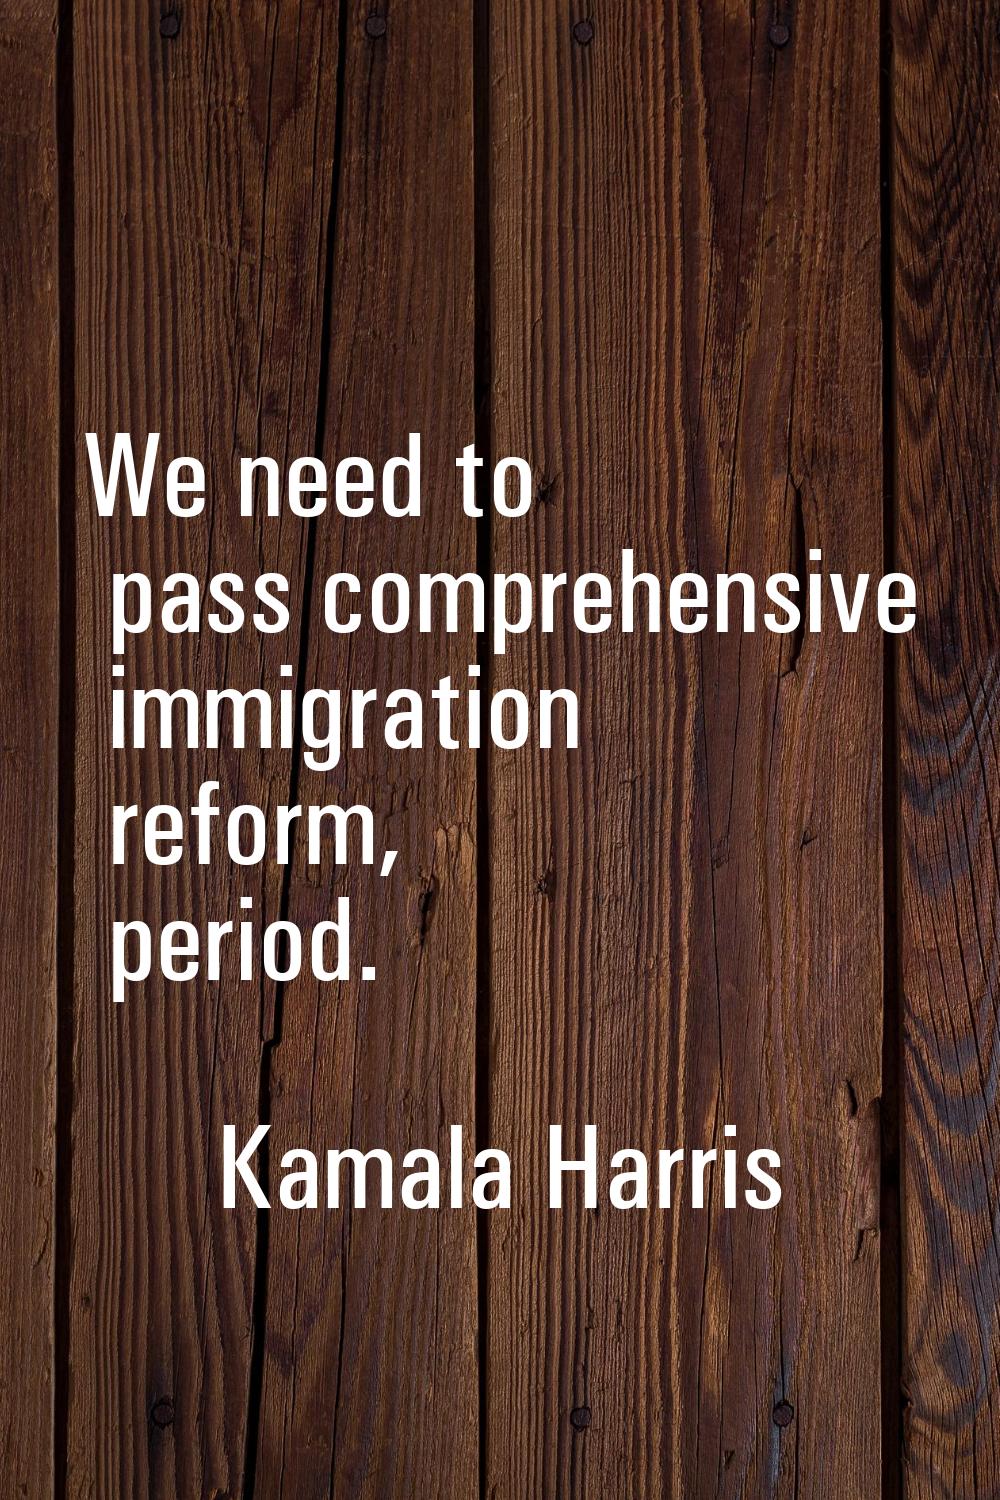 We need to pass comprehensive immigration reform, period.